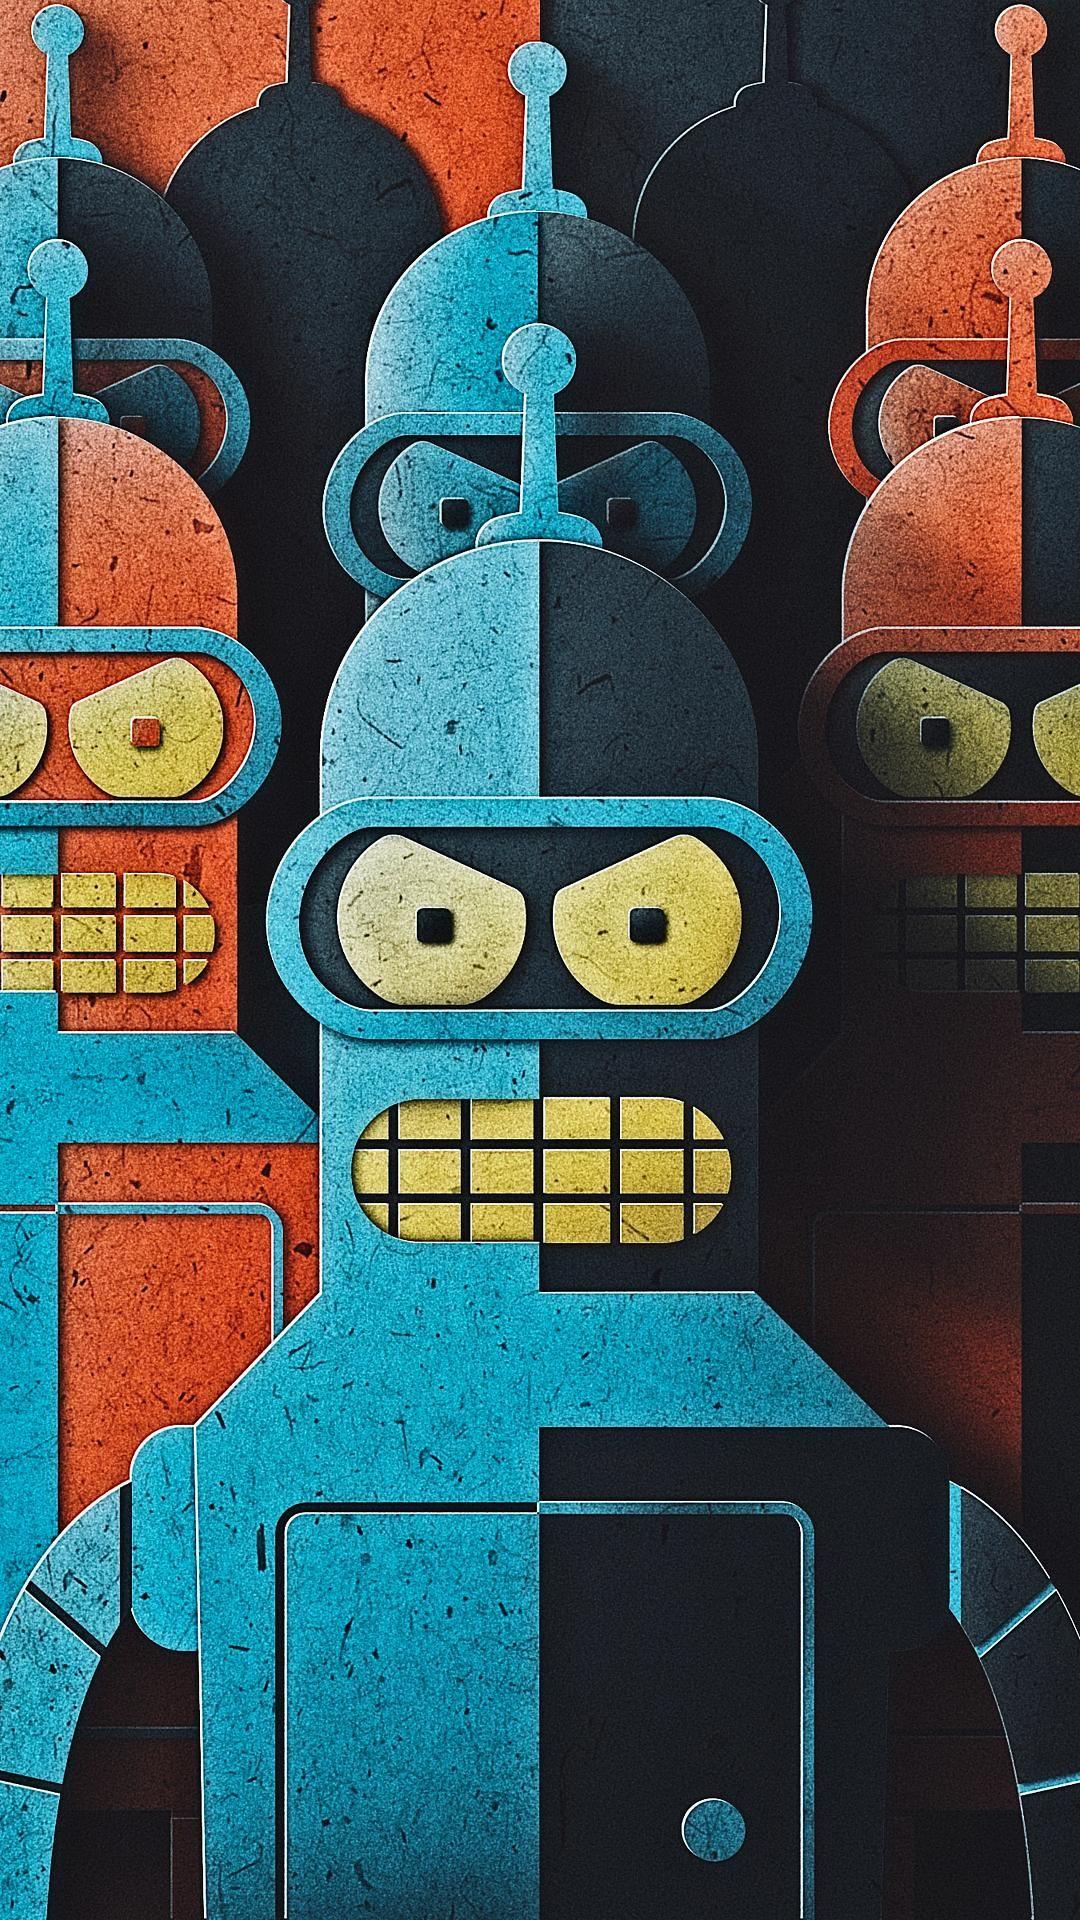 90 Bender Futurama HD Wallpapers and Backgrounds